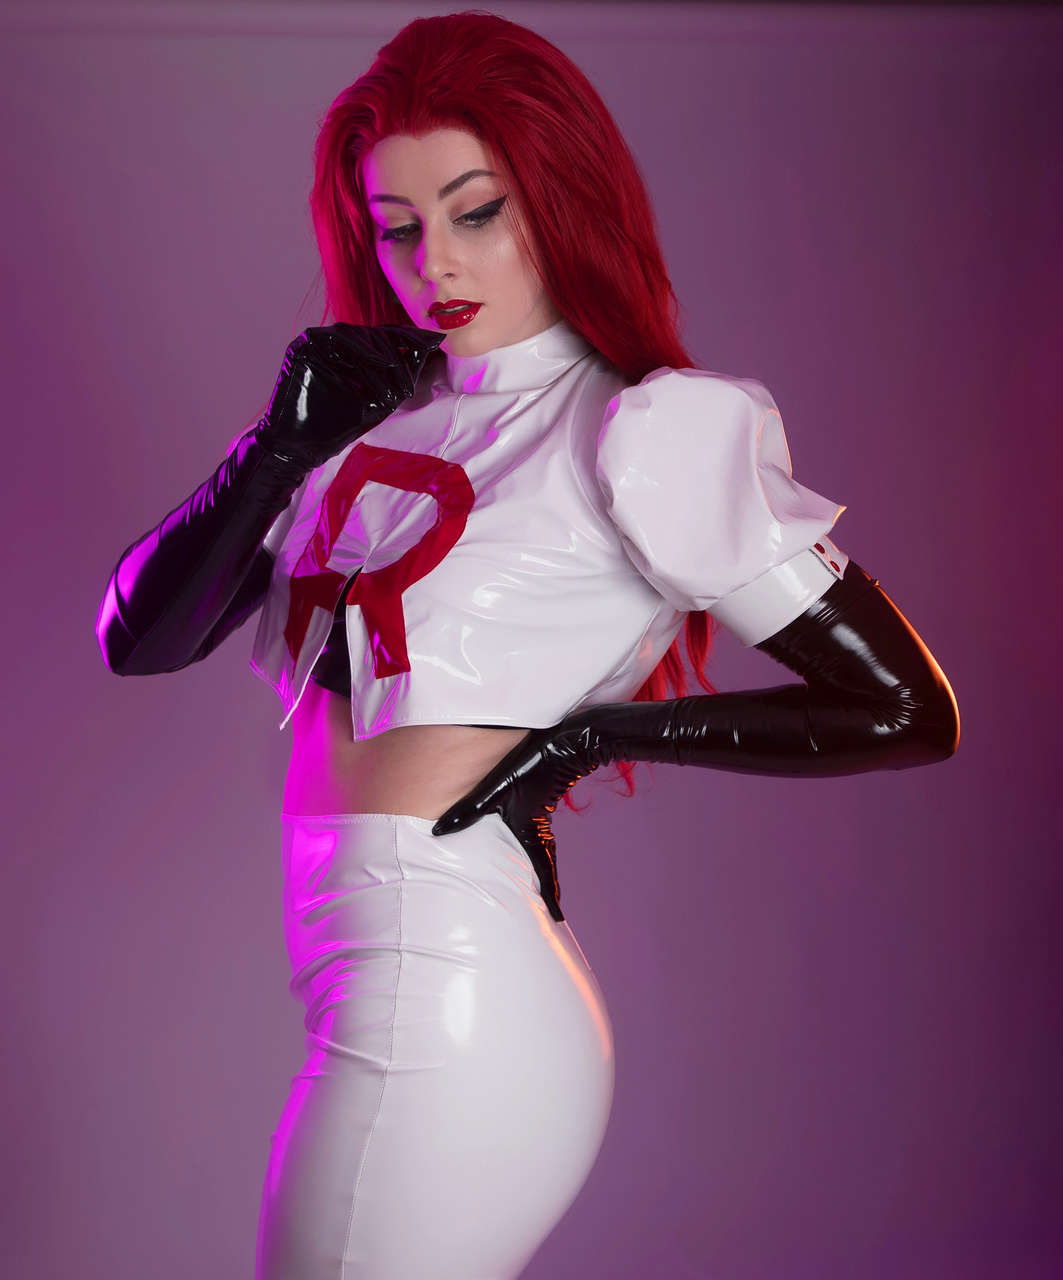 Self Jessie Cosplay By Cc Viper Photo By Bentobagginsphot